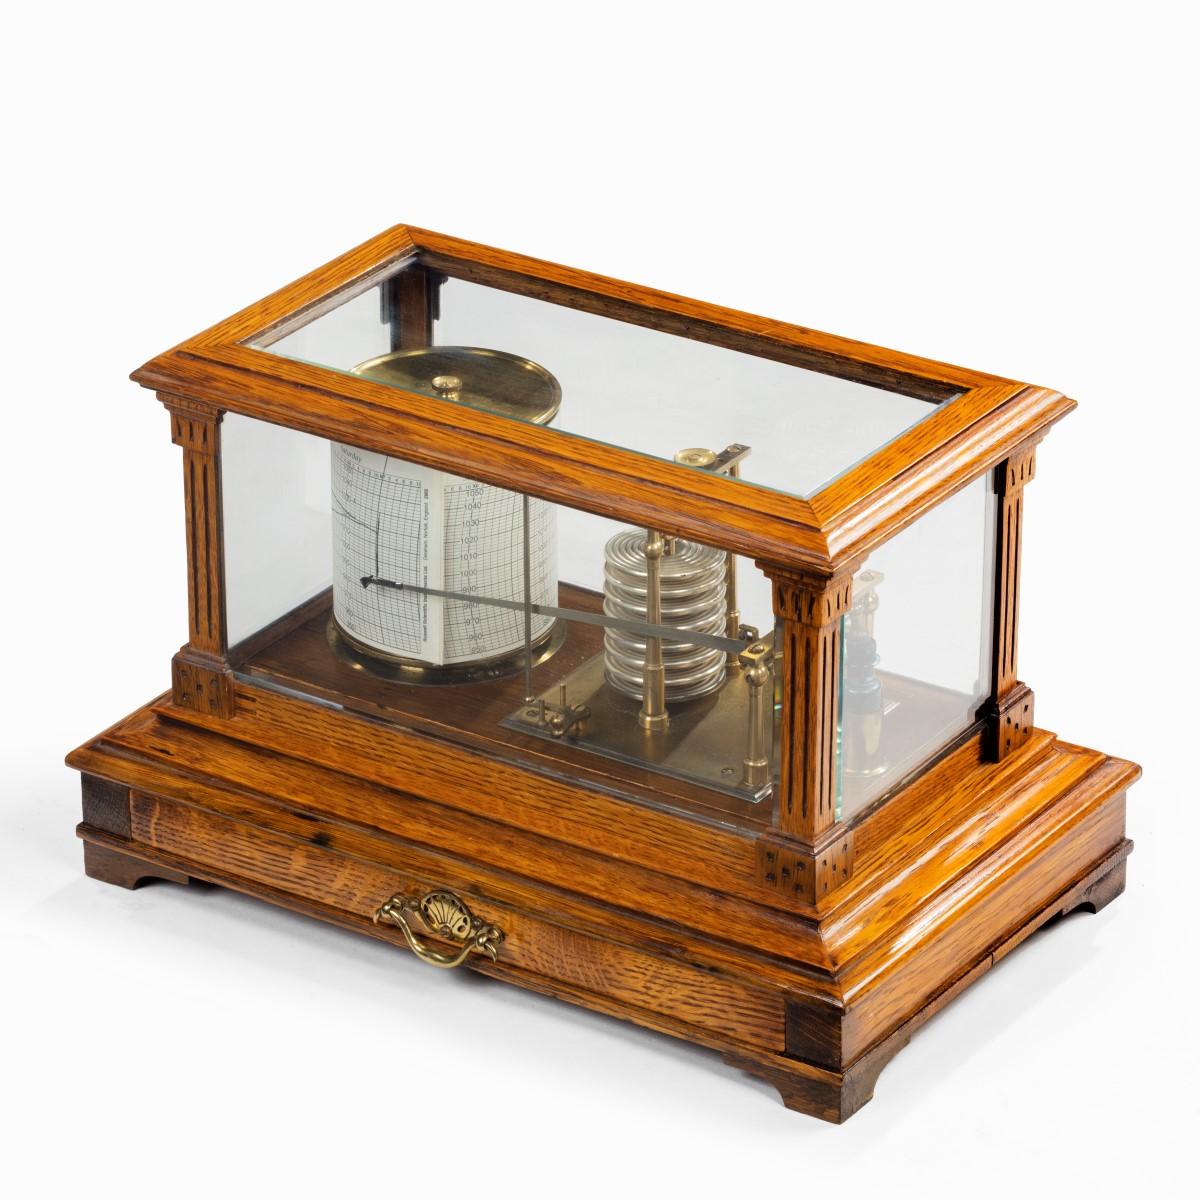 An Edwardian cased oak barograph with bevelled glass panels and a central chart drawer. Inscribed ‘Made by Short & Mason London, for A & N C S Westminster’.

A & N C S refers to the Army & Navy Co-operative Society Ltd., an army surplus department